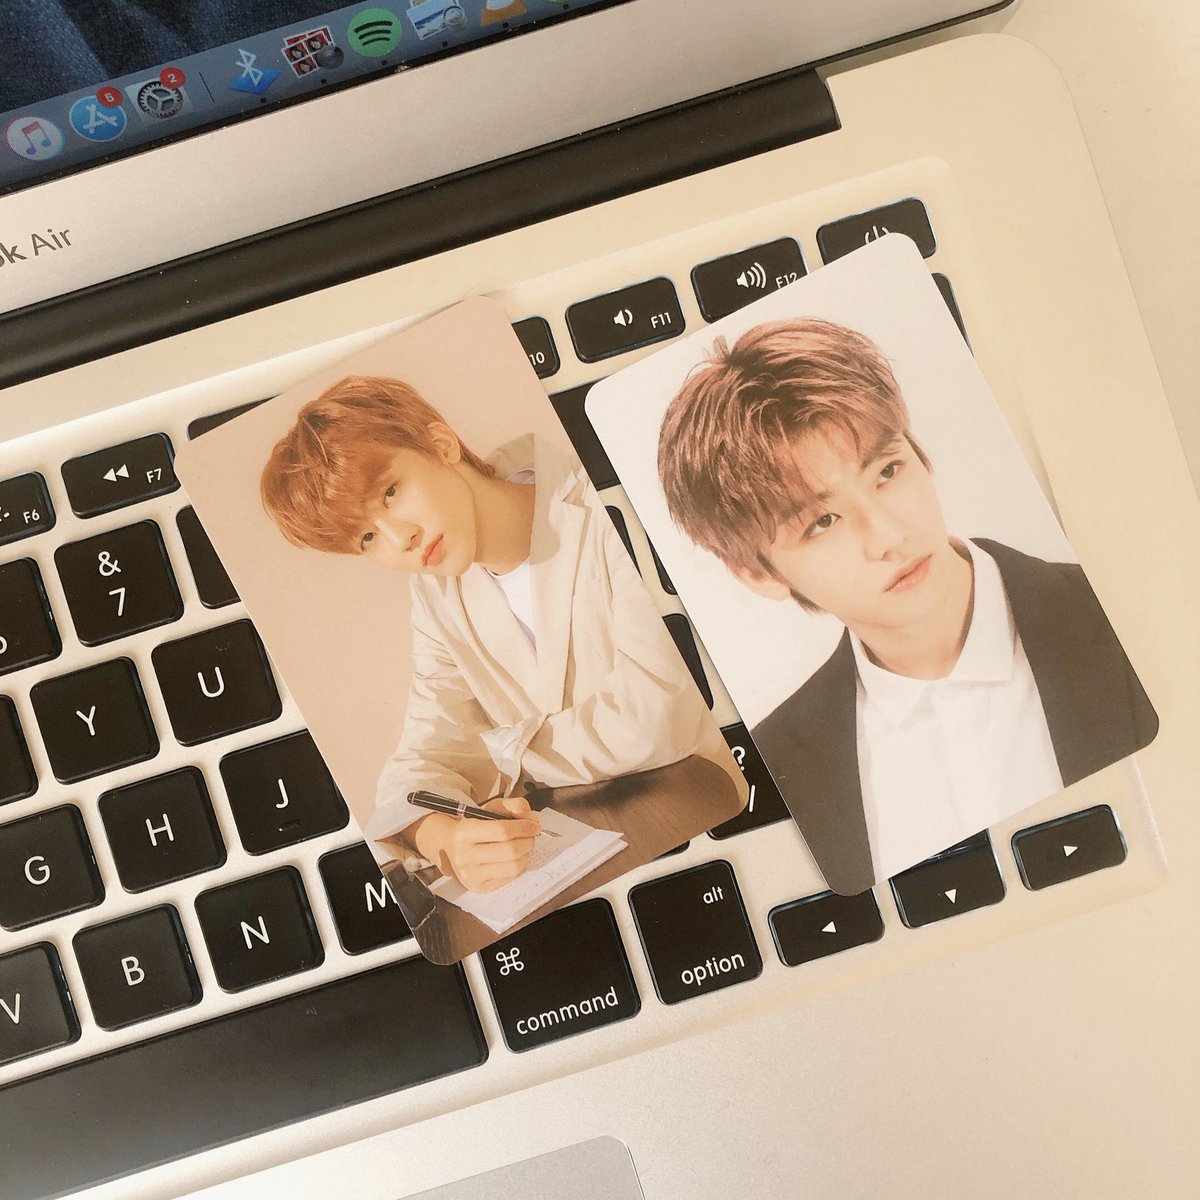 super late feedback but thank you for my sg 2020 jaemin pob pcs  @nctmarketph  another hassle-free transaction with your shop !! will definitely order again ^-^  #nctmarketphFeedbacks